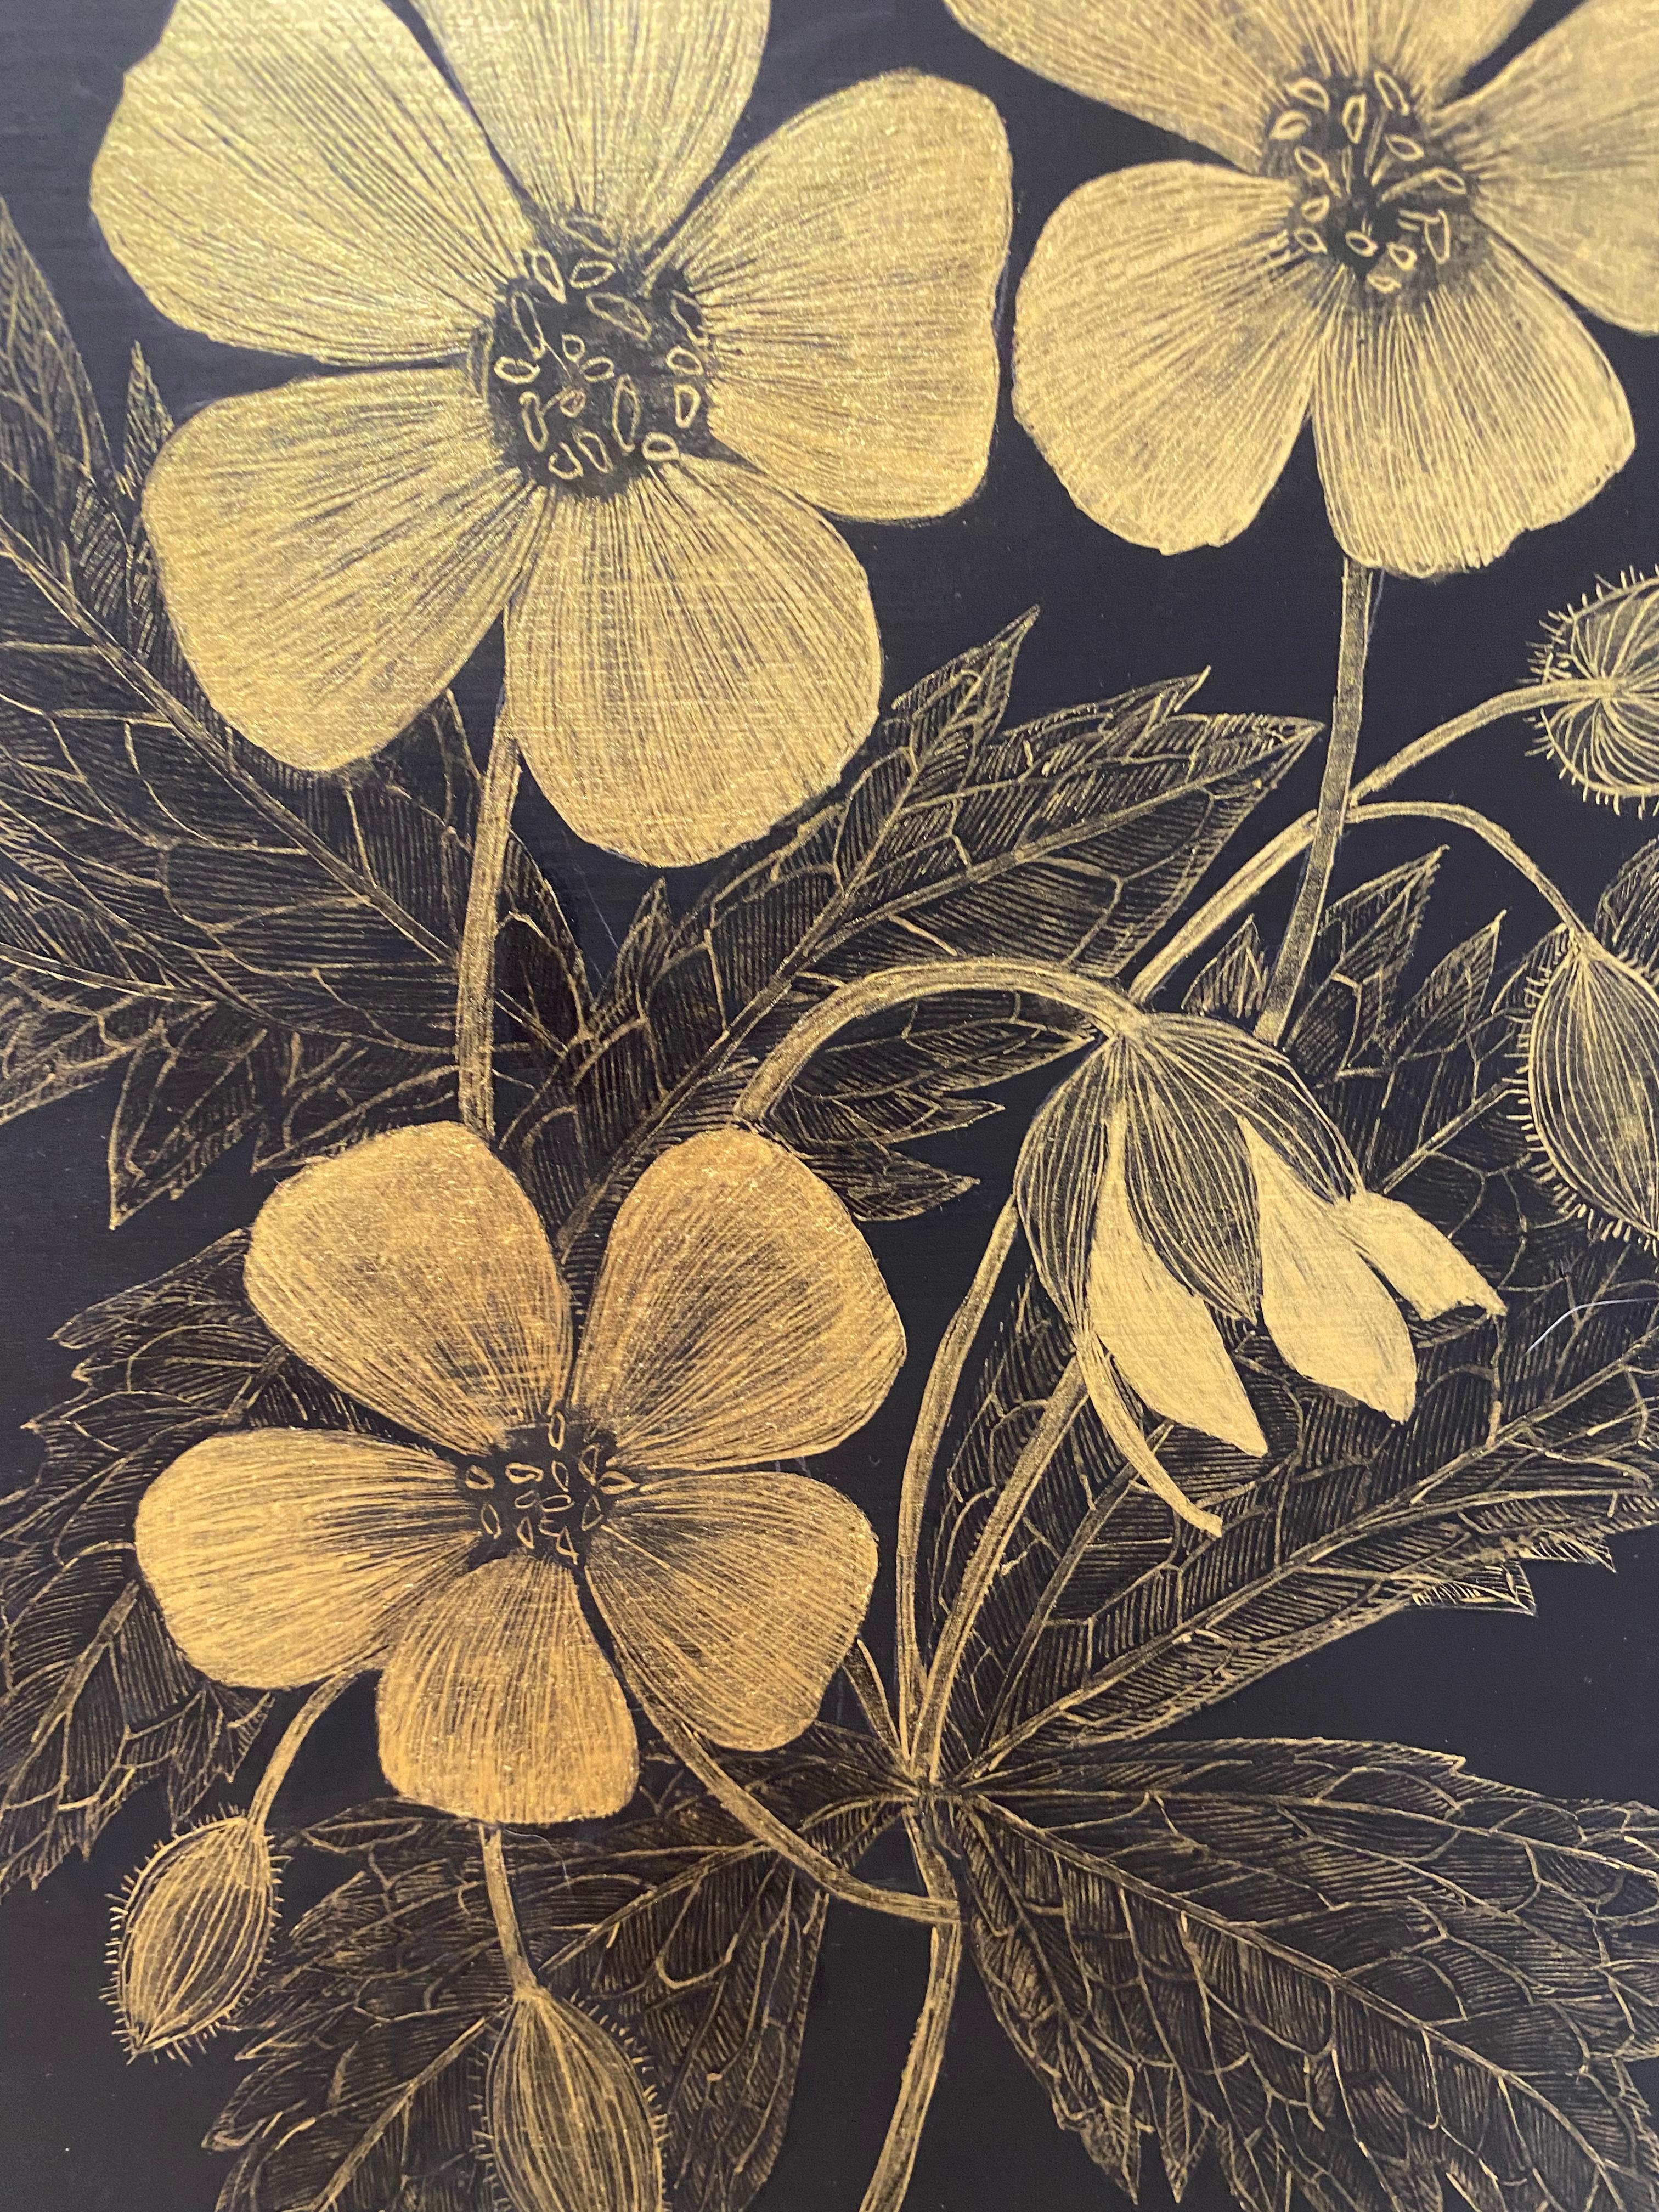 Wild Geranium Two, Botanical Painting Black Panel, Gold Flowers, Leaves, Stem For Sale 4